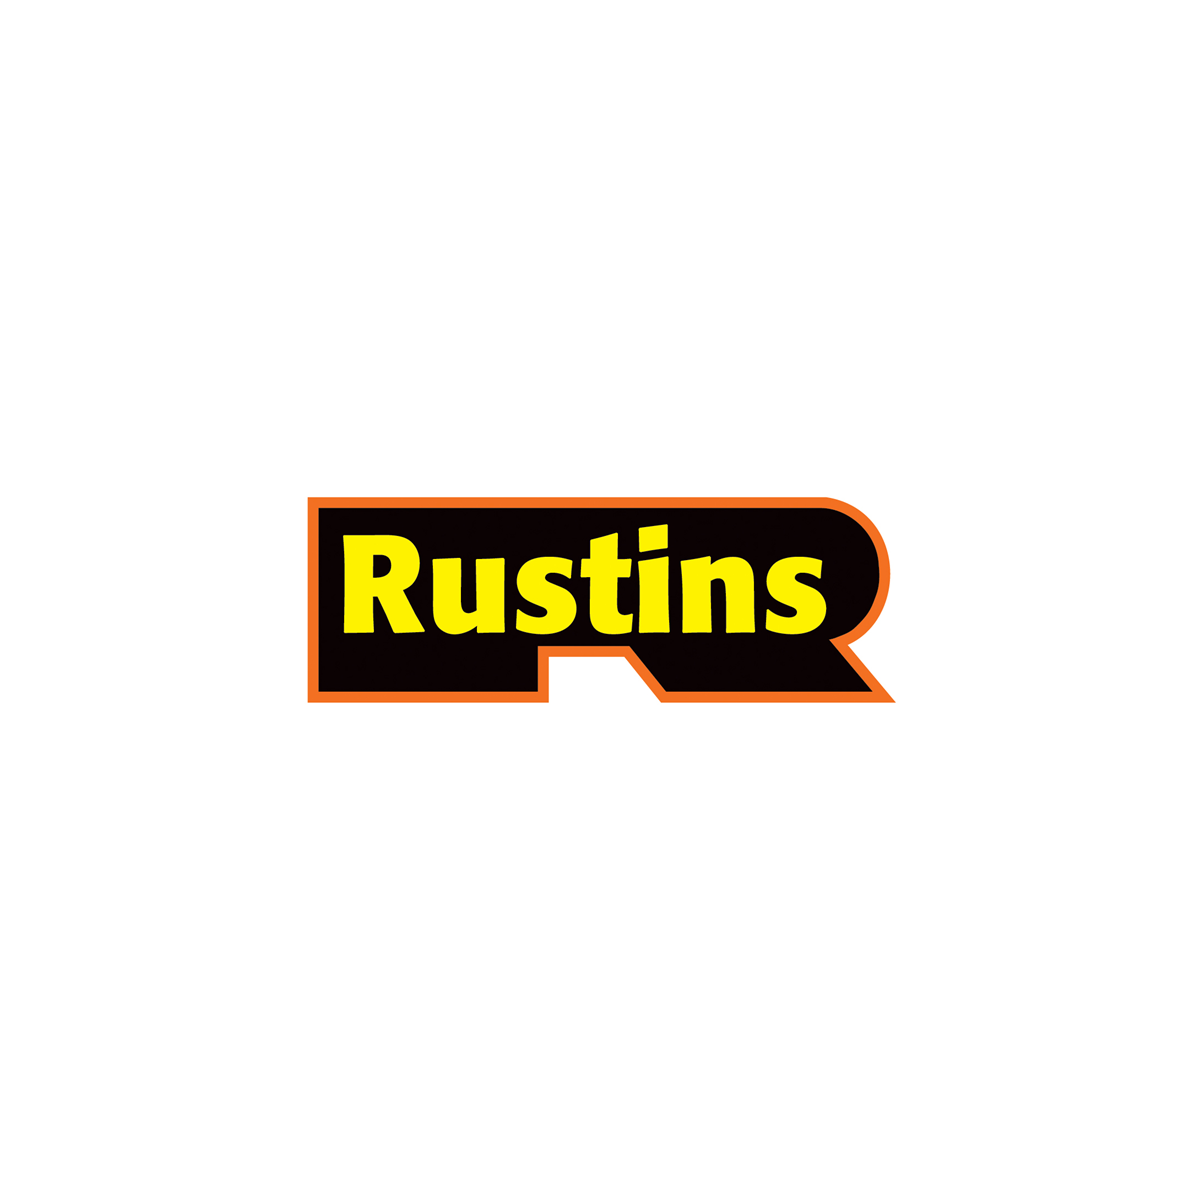 Where to buy Rustins Products.